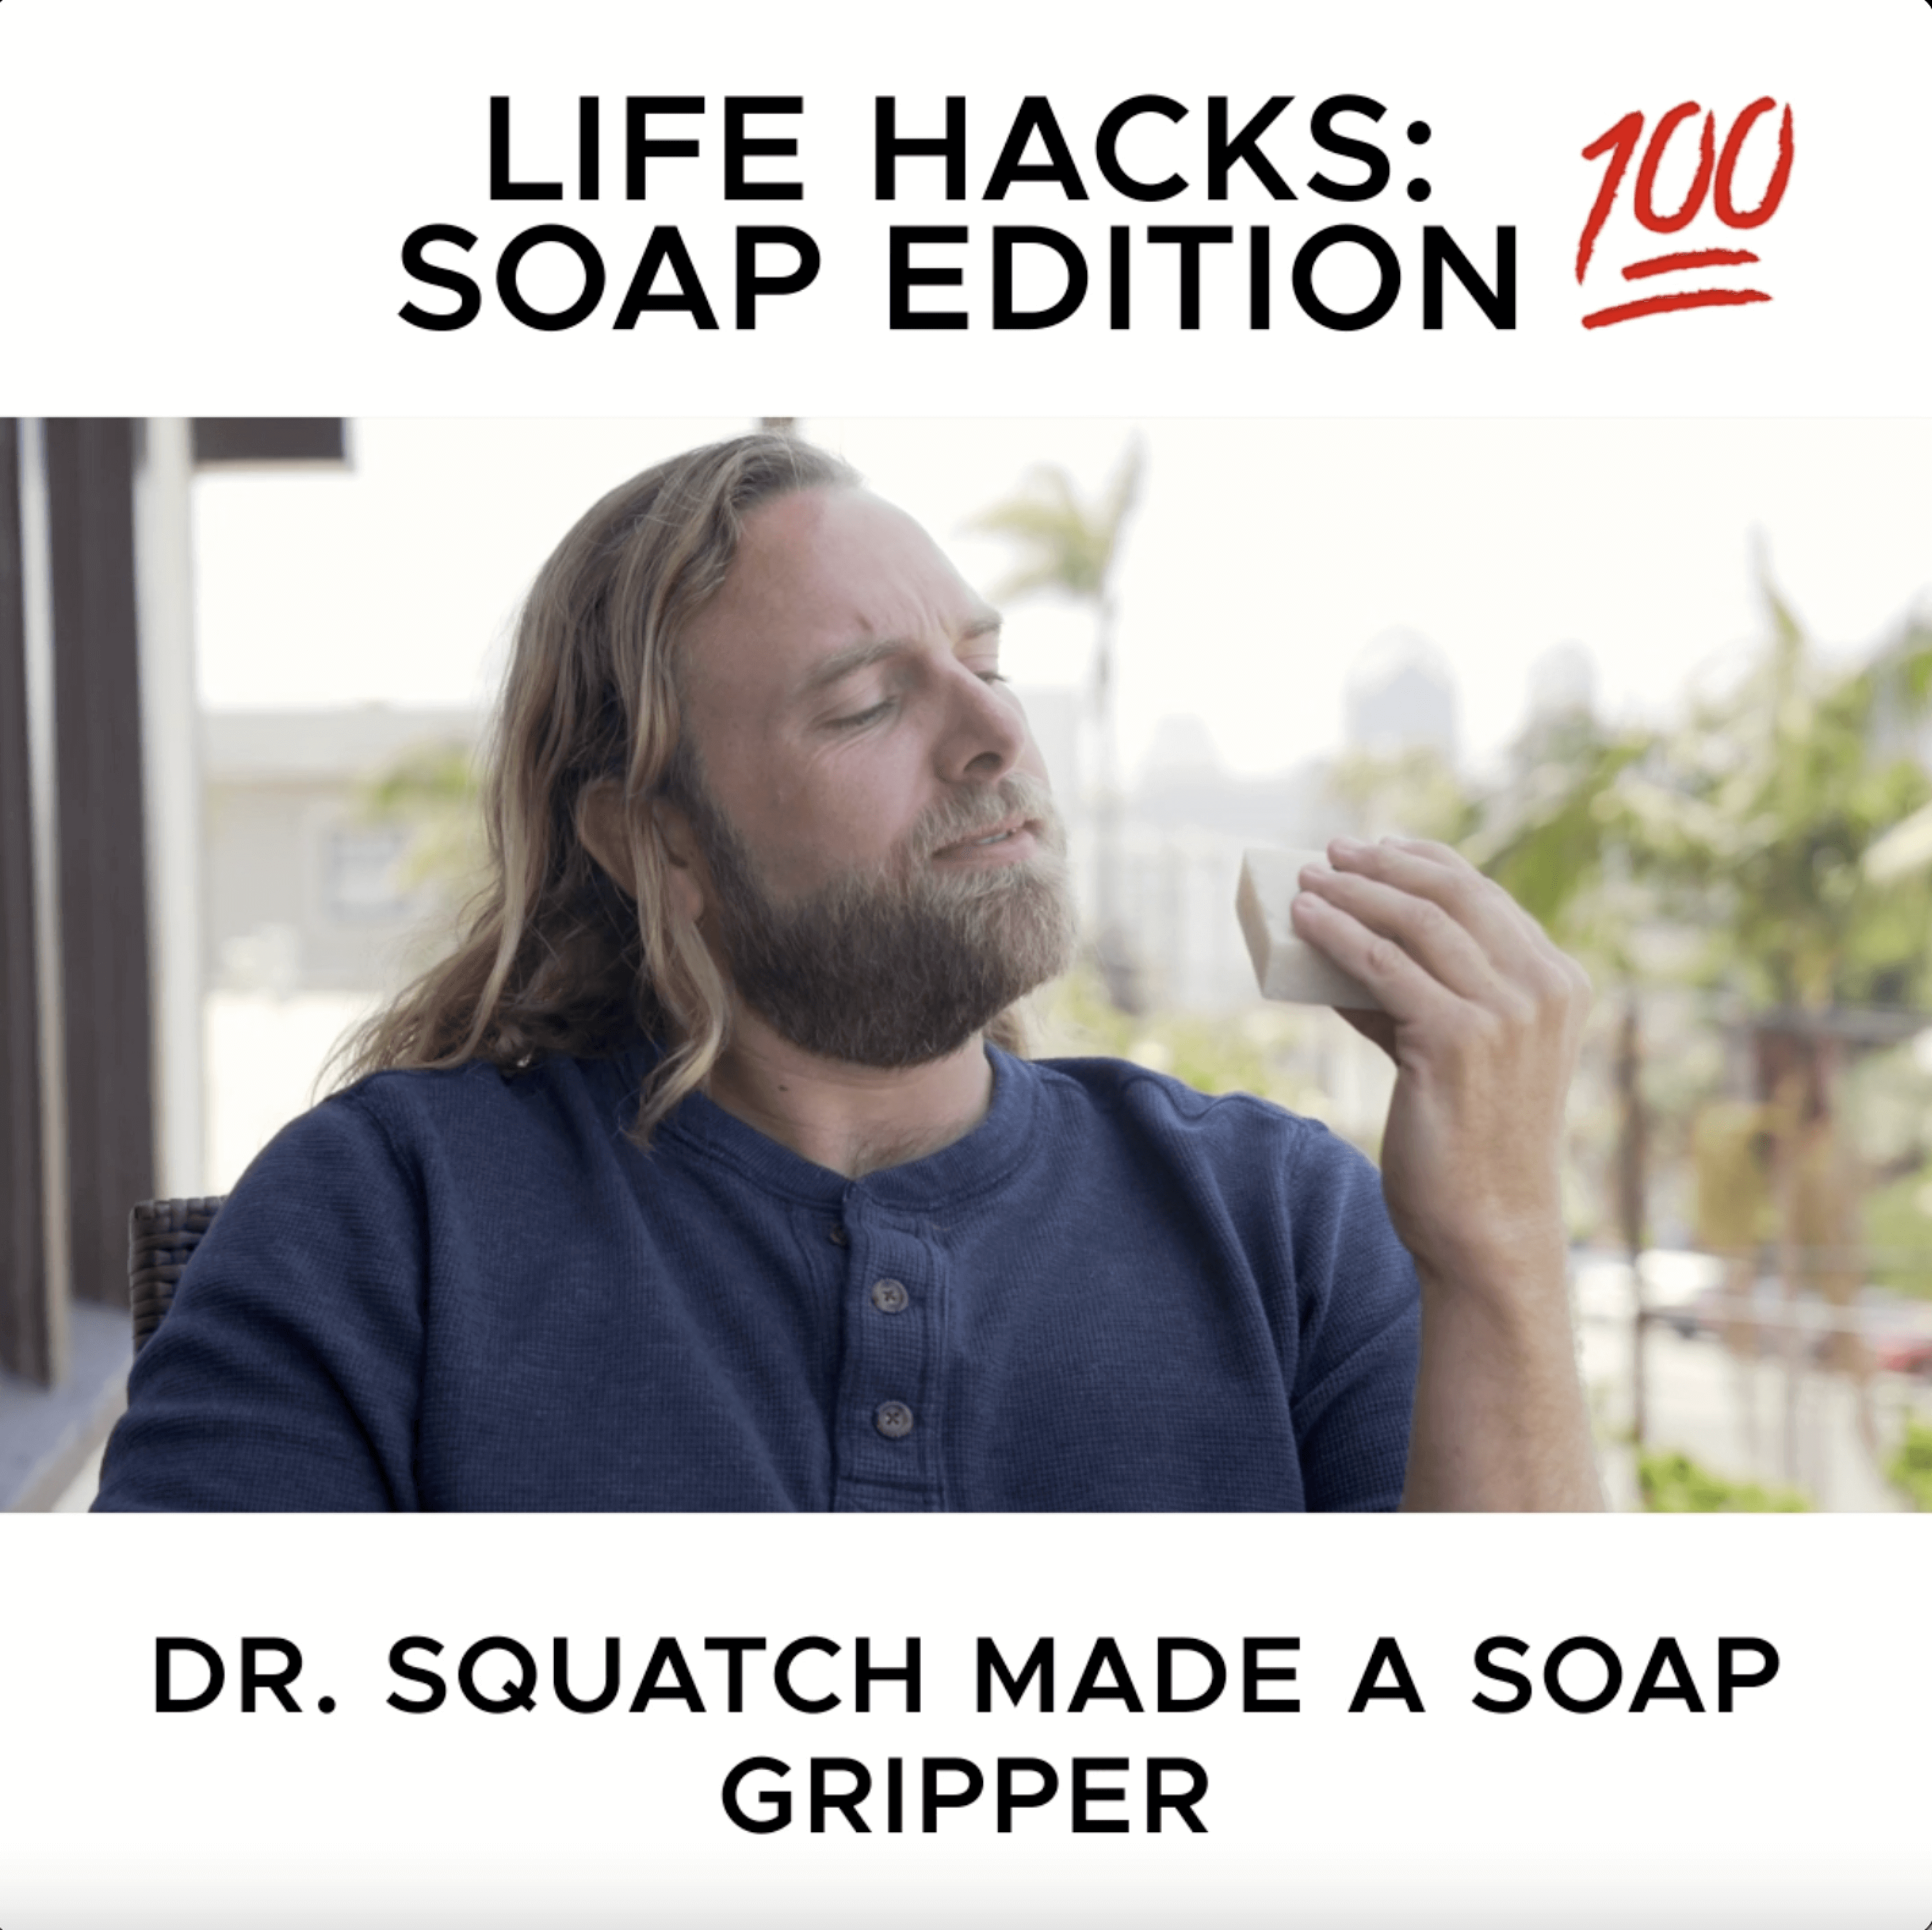 Soap gripper-dr squatch - She Shed He Shed